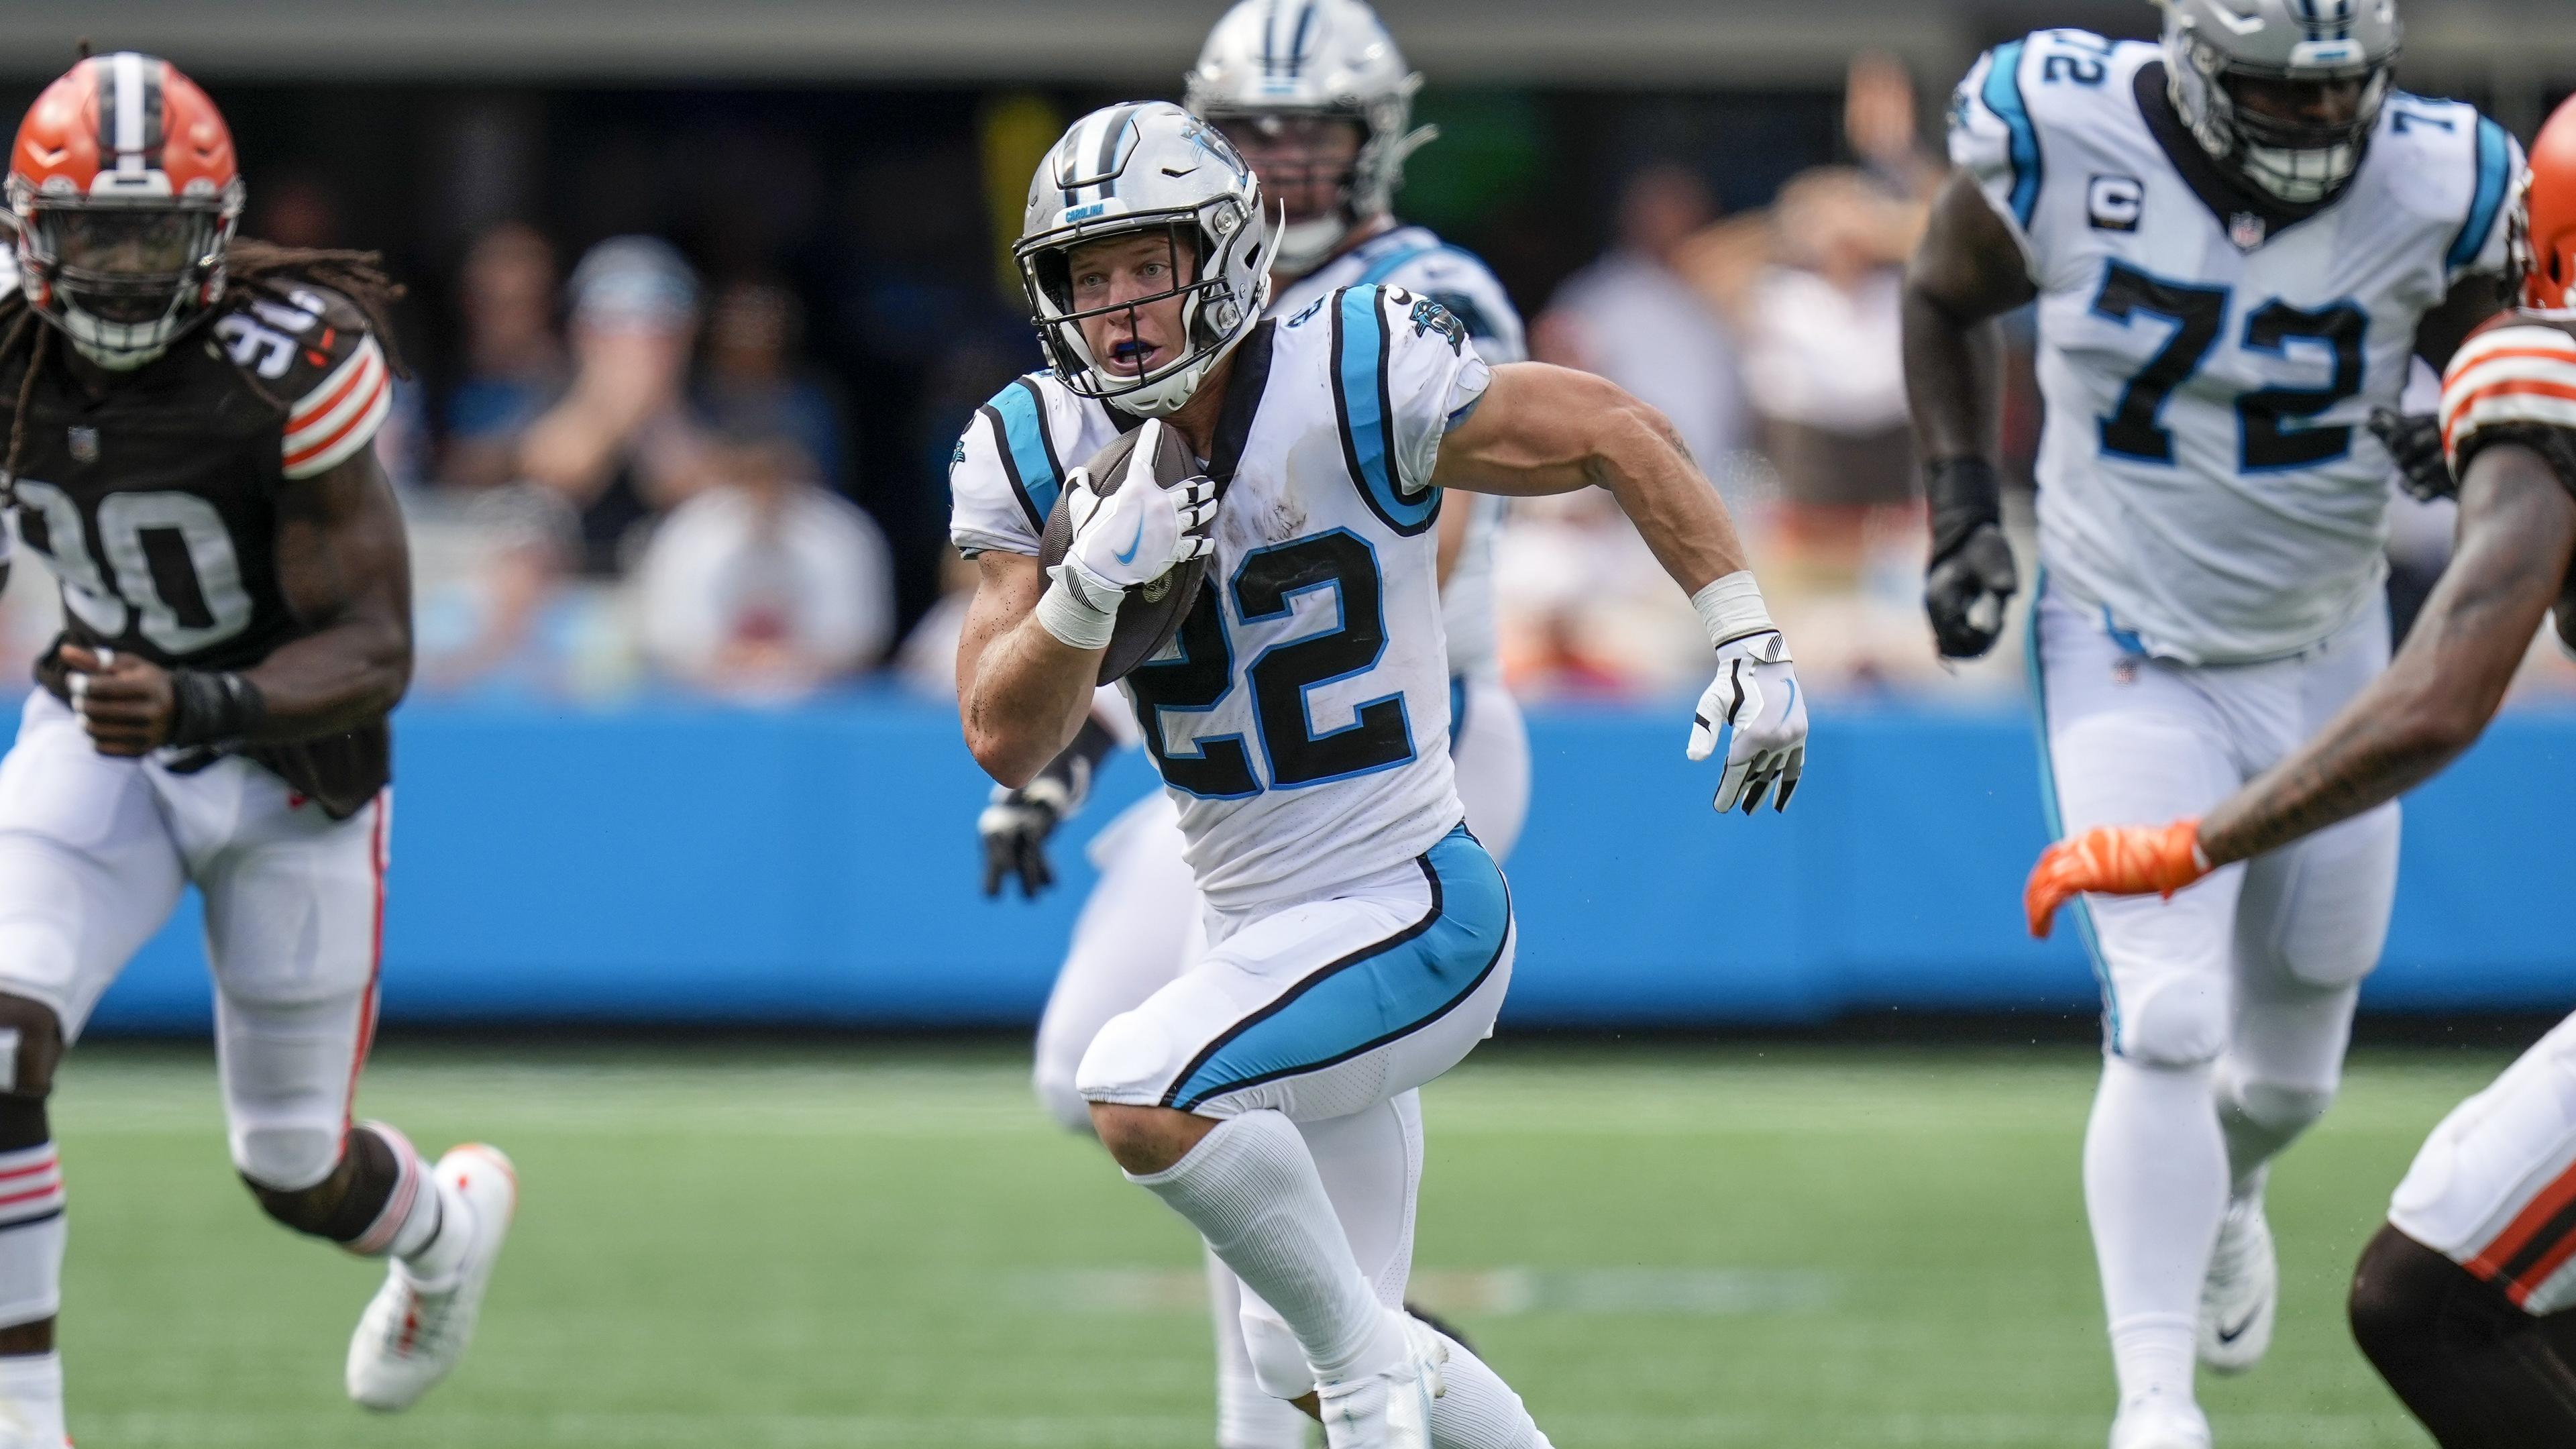 Sep 11, 2022; Charlotte, North Carolina, USA; Carolina Panthers running back Christian McCaffrey (22) breaks into open field during the second half against the Cleveland Browns at Bank of America Stadium. Mandatory Credit: Jim Dedmon-USA TODAY Sports / Sep 11, 2022; Charlotte, North Carolina, USA; Carolina Panthers running back Christian McCaffrey (22) breaks into open field during the second half against the Cleveland Browns at Bank of America Stadium. Mandatory Credit: Jim Dedmon-USA TODAY Sports